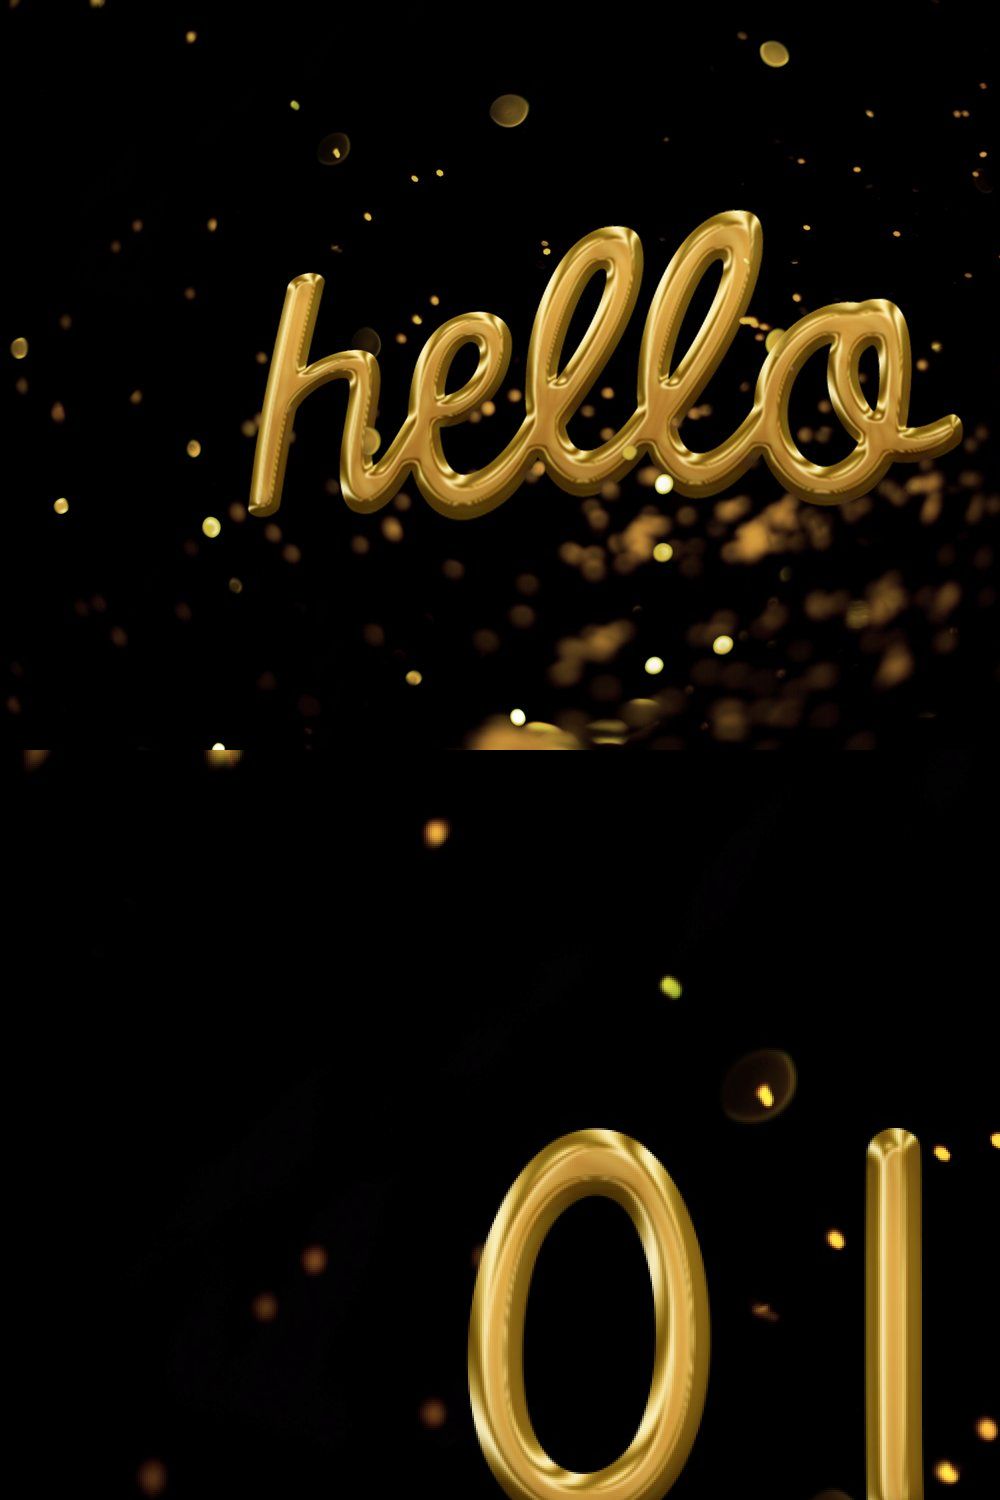 Golden type photoshop style pinterest preview image.